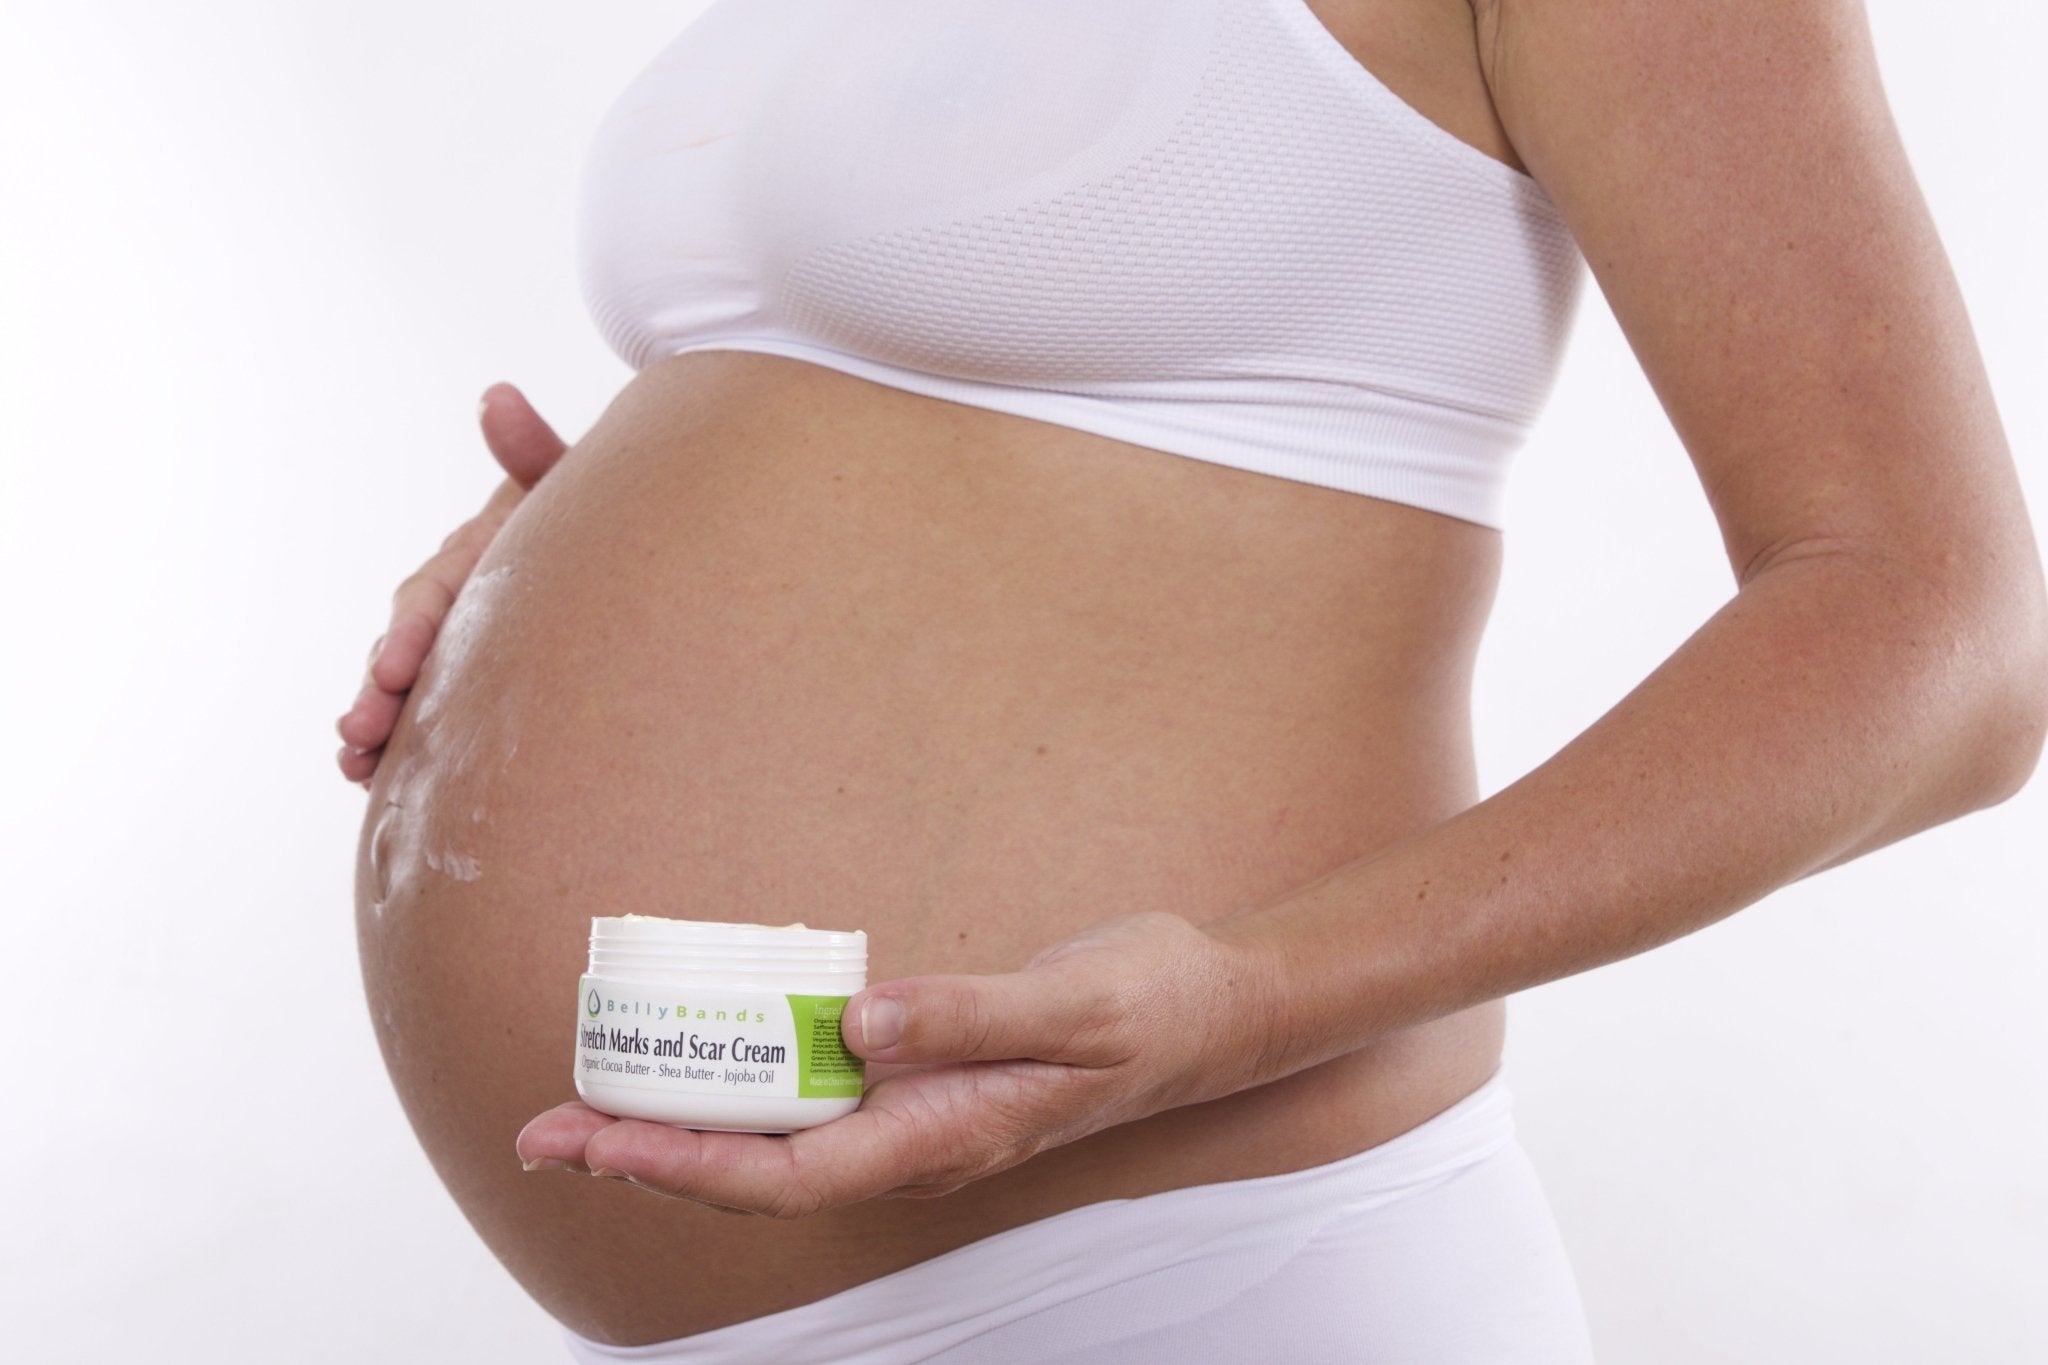 How to Care for Your Skin During Pregnancy - Belly Bands